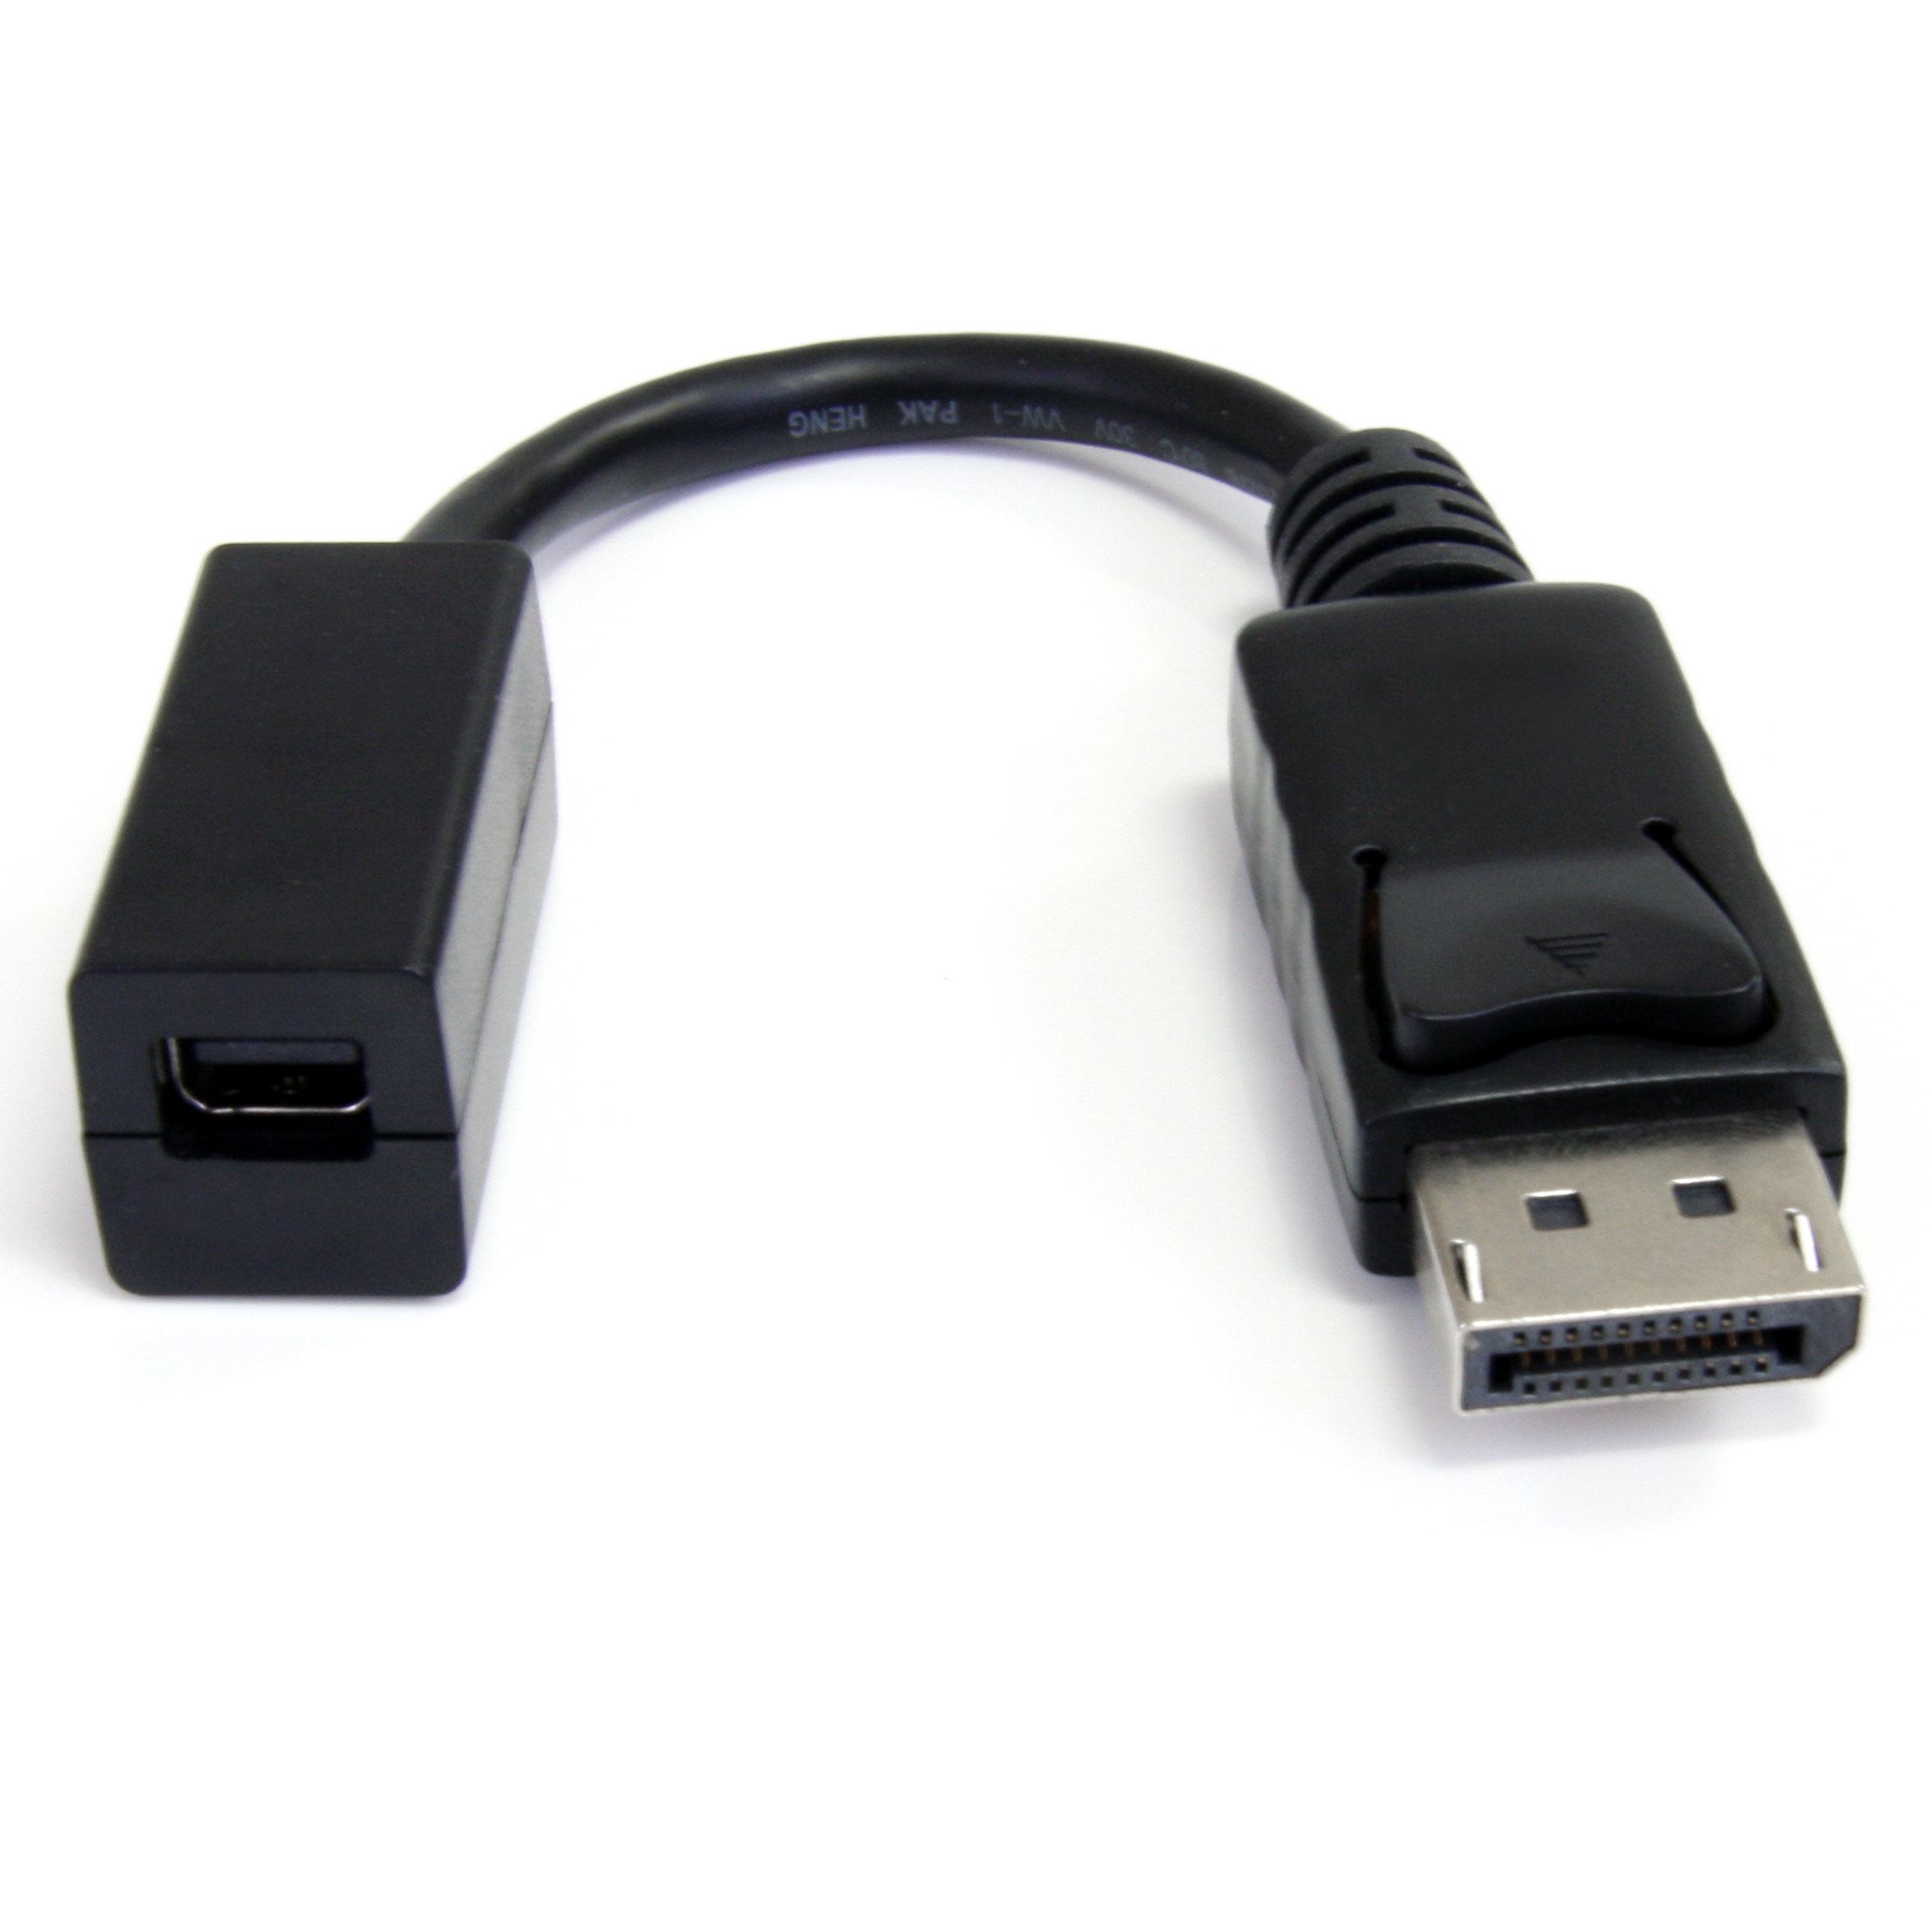 A-DPMDP-MF: 6 inch DisplayPort 1.2 Male to MDP Female Adapter